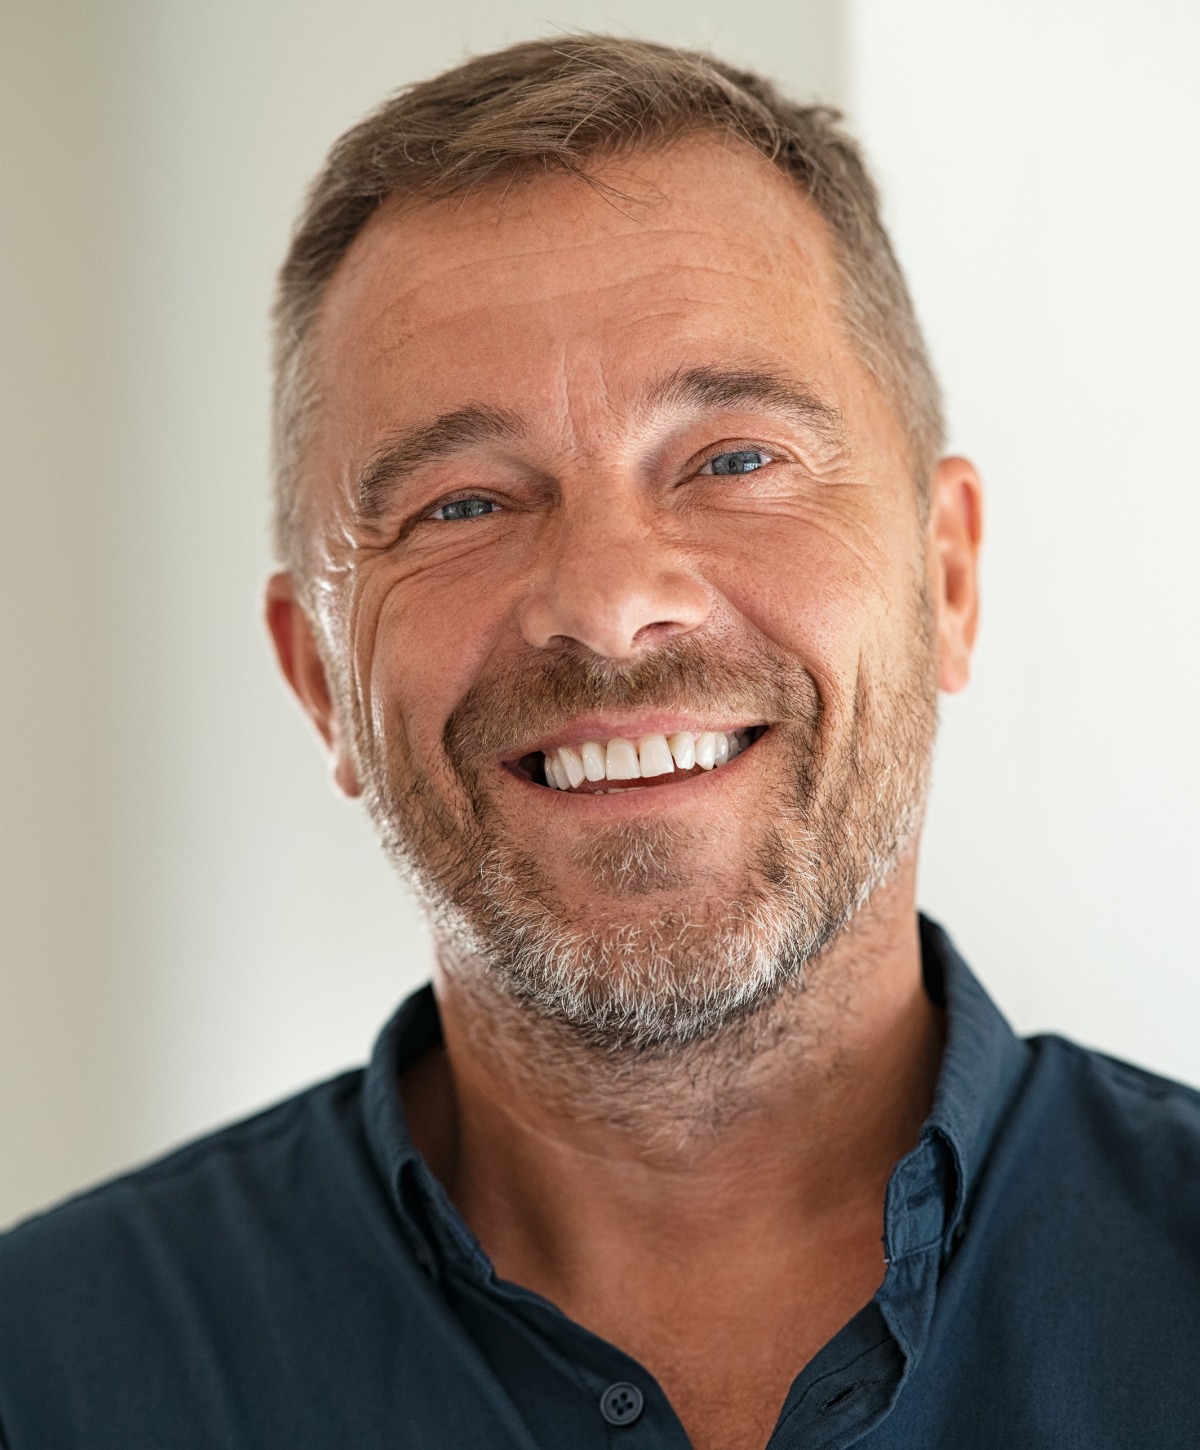 Smiling Middle Aged Facelift Patient